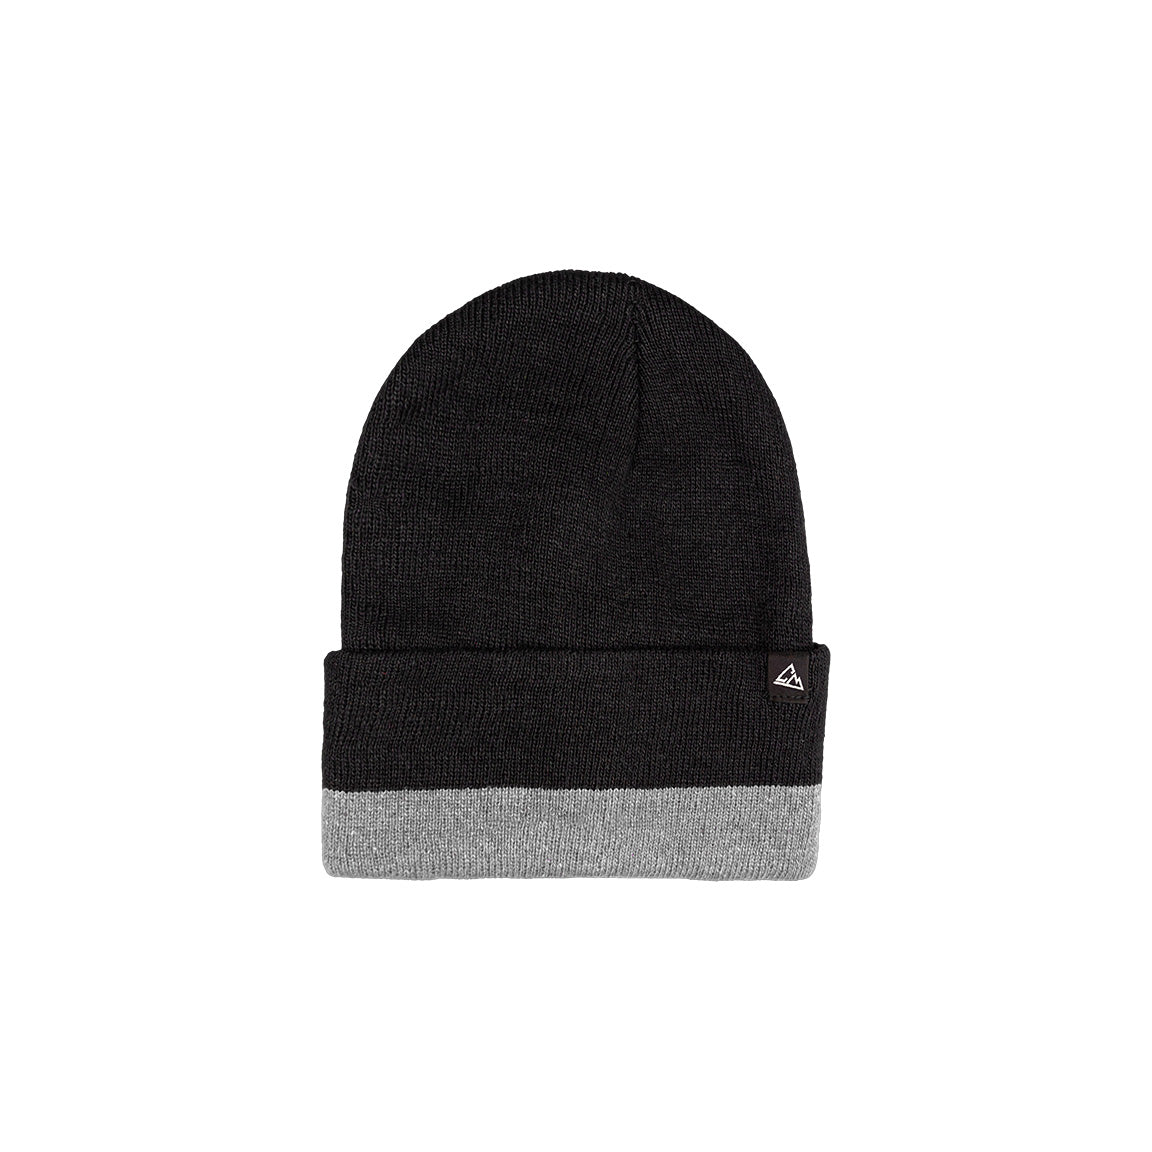 Displayed is a black ribbed beanie with a grey block on the cuff and a small triangular logo affixed to the side.